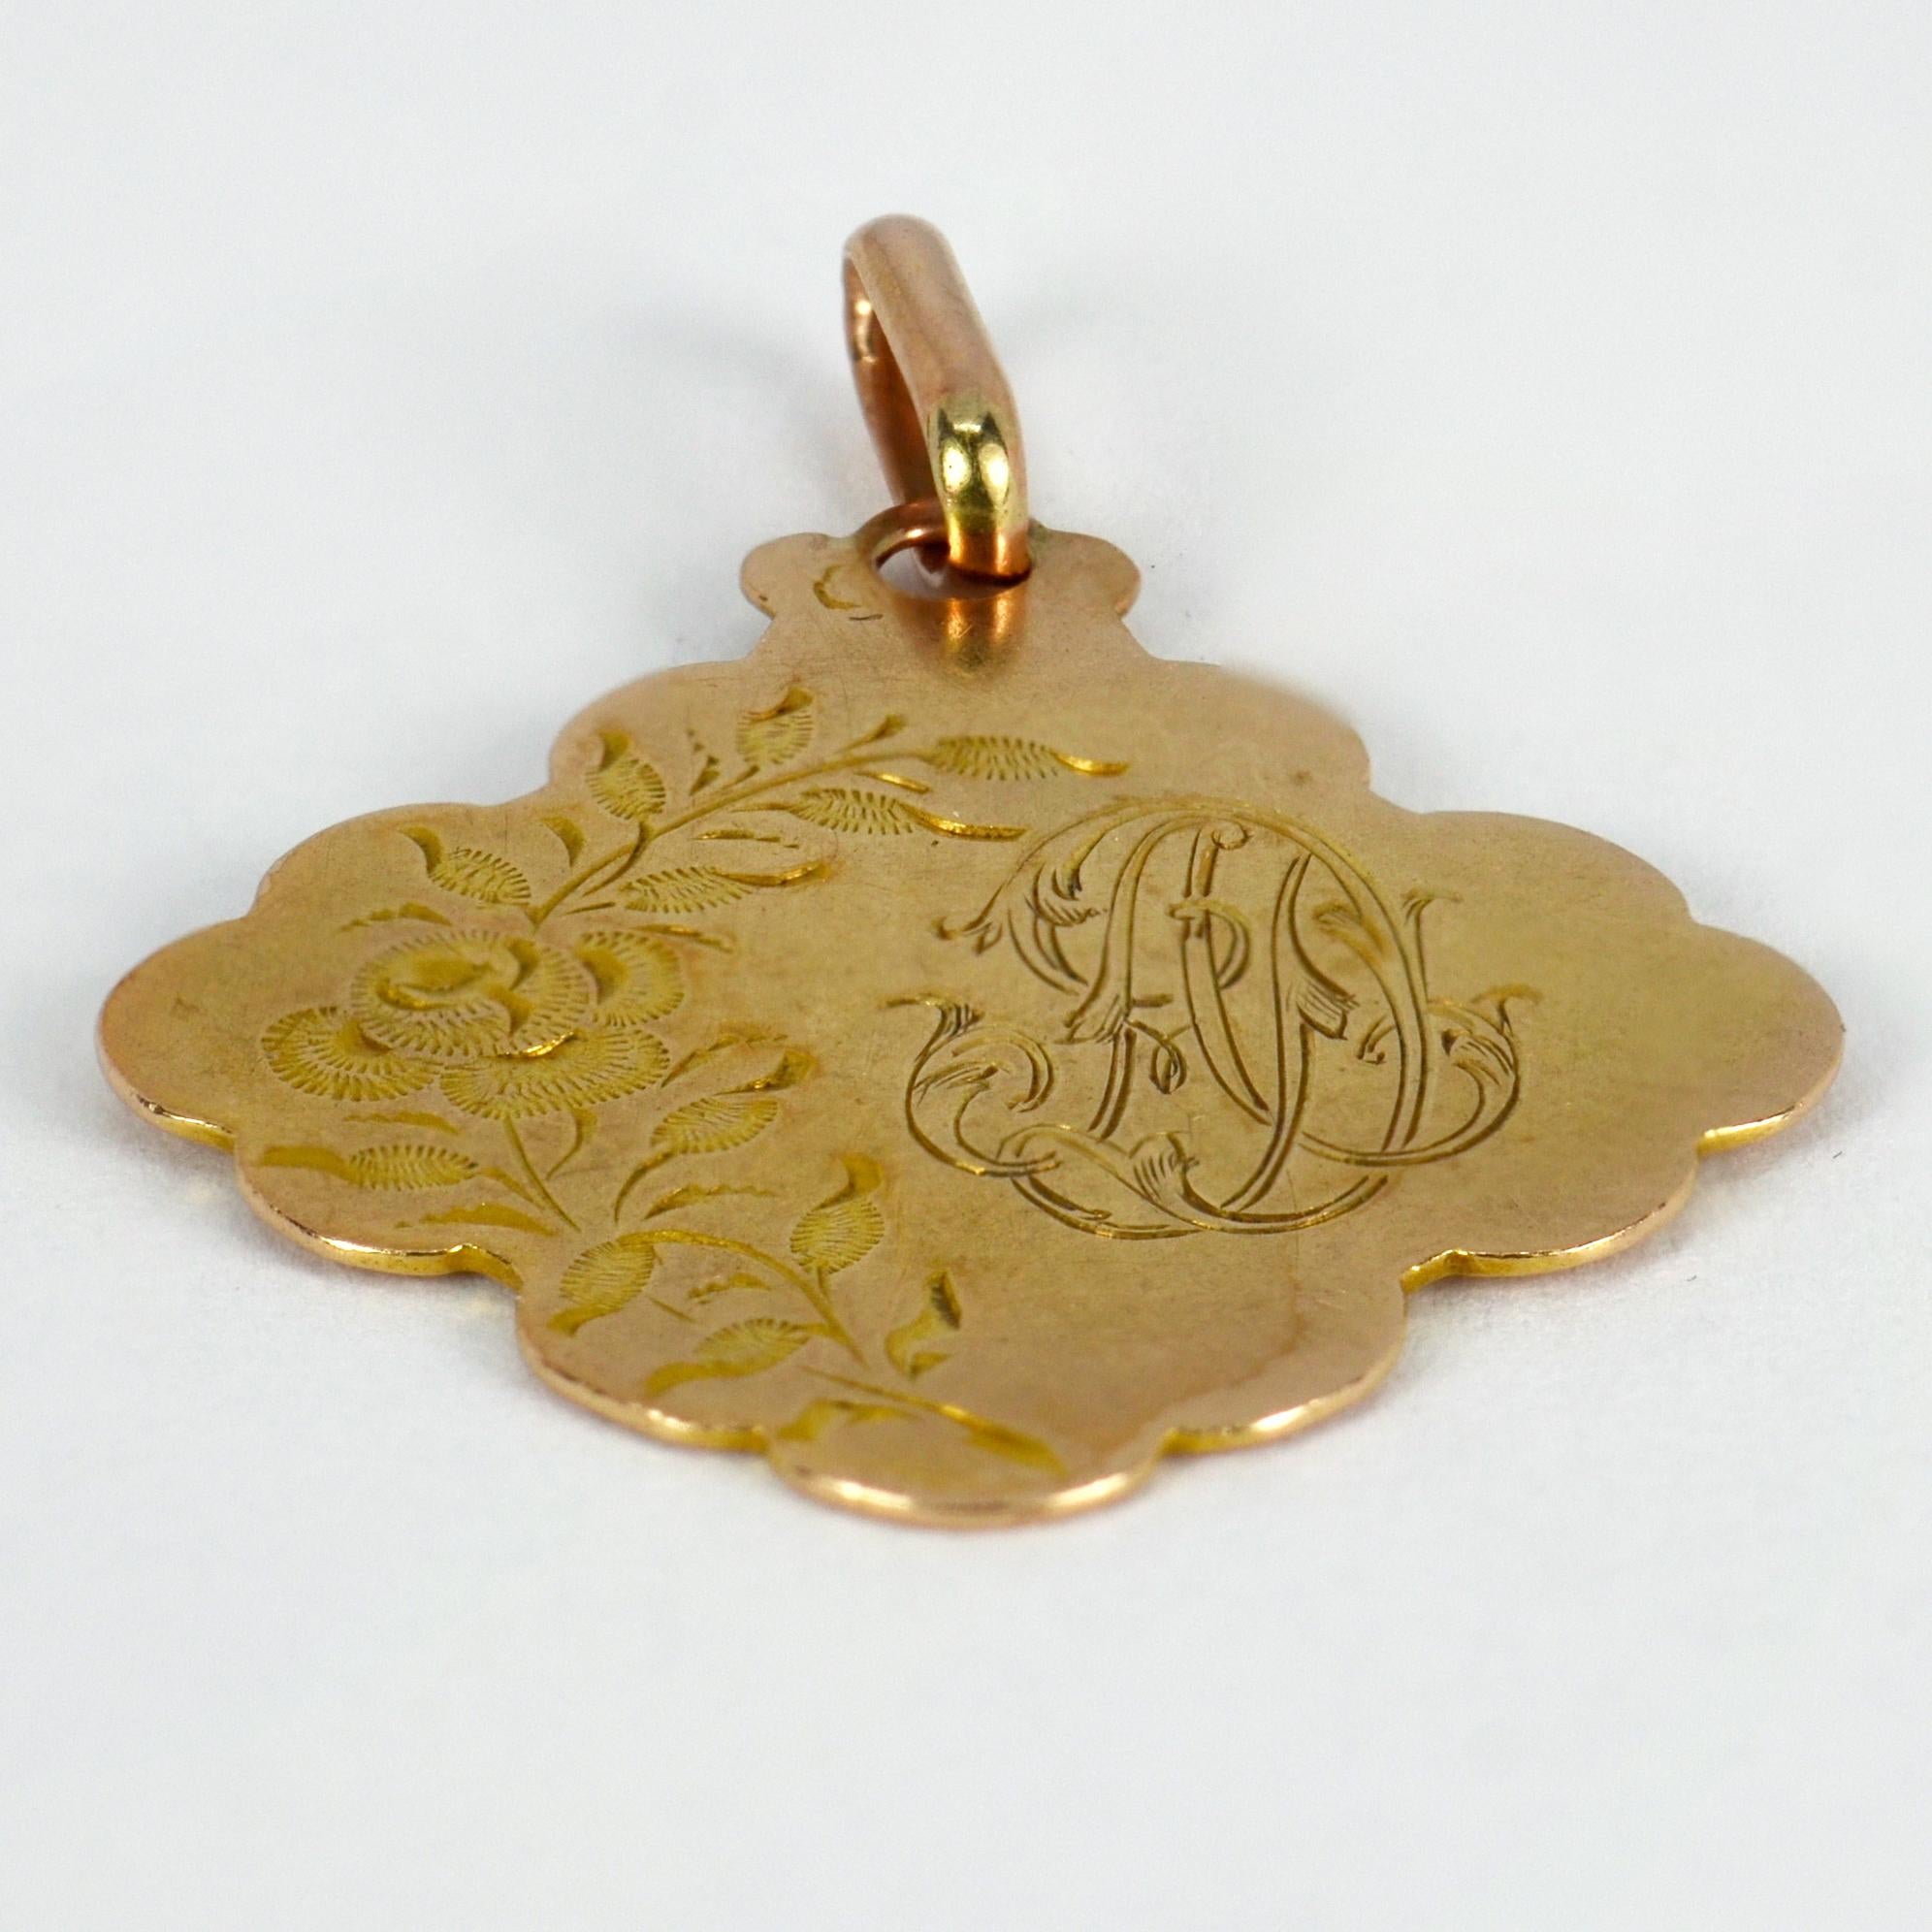 A French 18 karat (18K) yellow gold charm pendant designed as scalloped quatrefoil engraved with a rose and the monogram of the initials AD. Stamped with the eagle’s head for 18 karat gold and French manufacture.
 
Dimensions: 2.6 x 2.3 x 0.05 cm